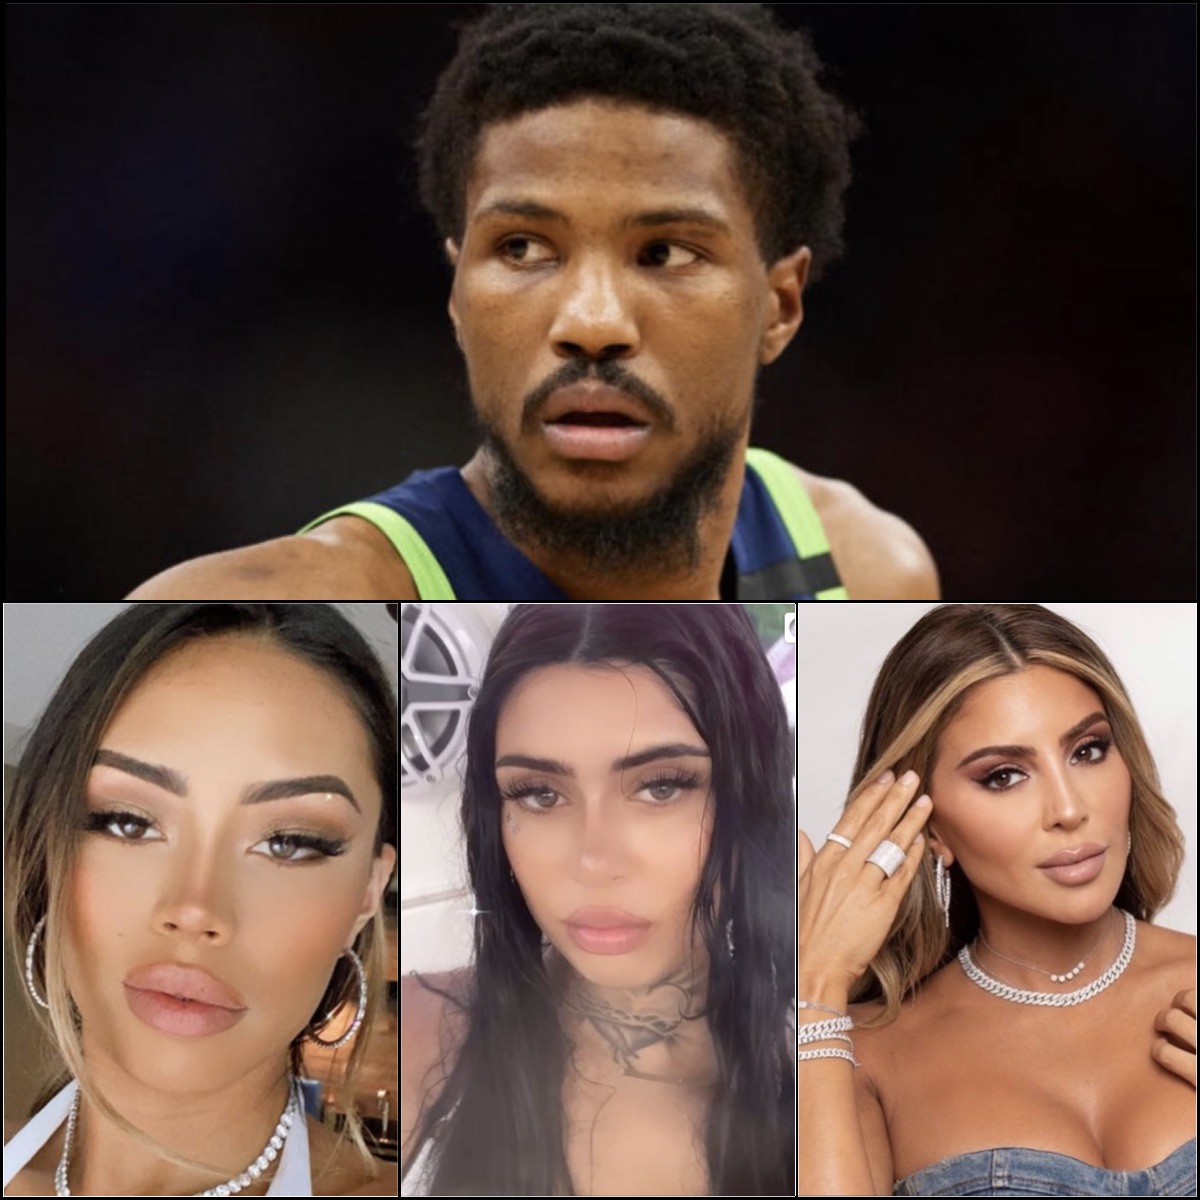 Montana Yao Files For Divorce After Catching Malik Beasley Cheating With Larsa Pippen and a Stripper | BlackSportsOnline